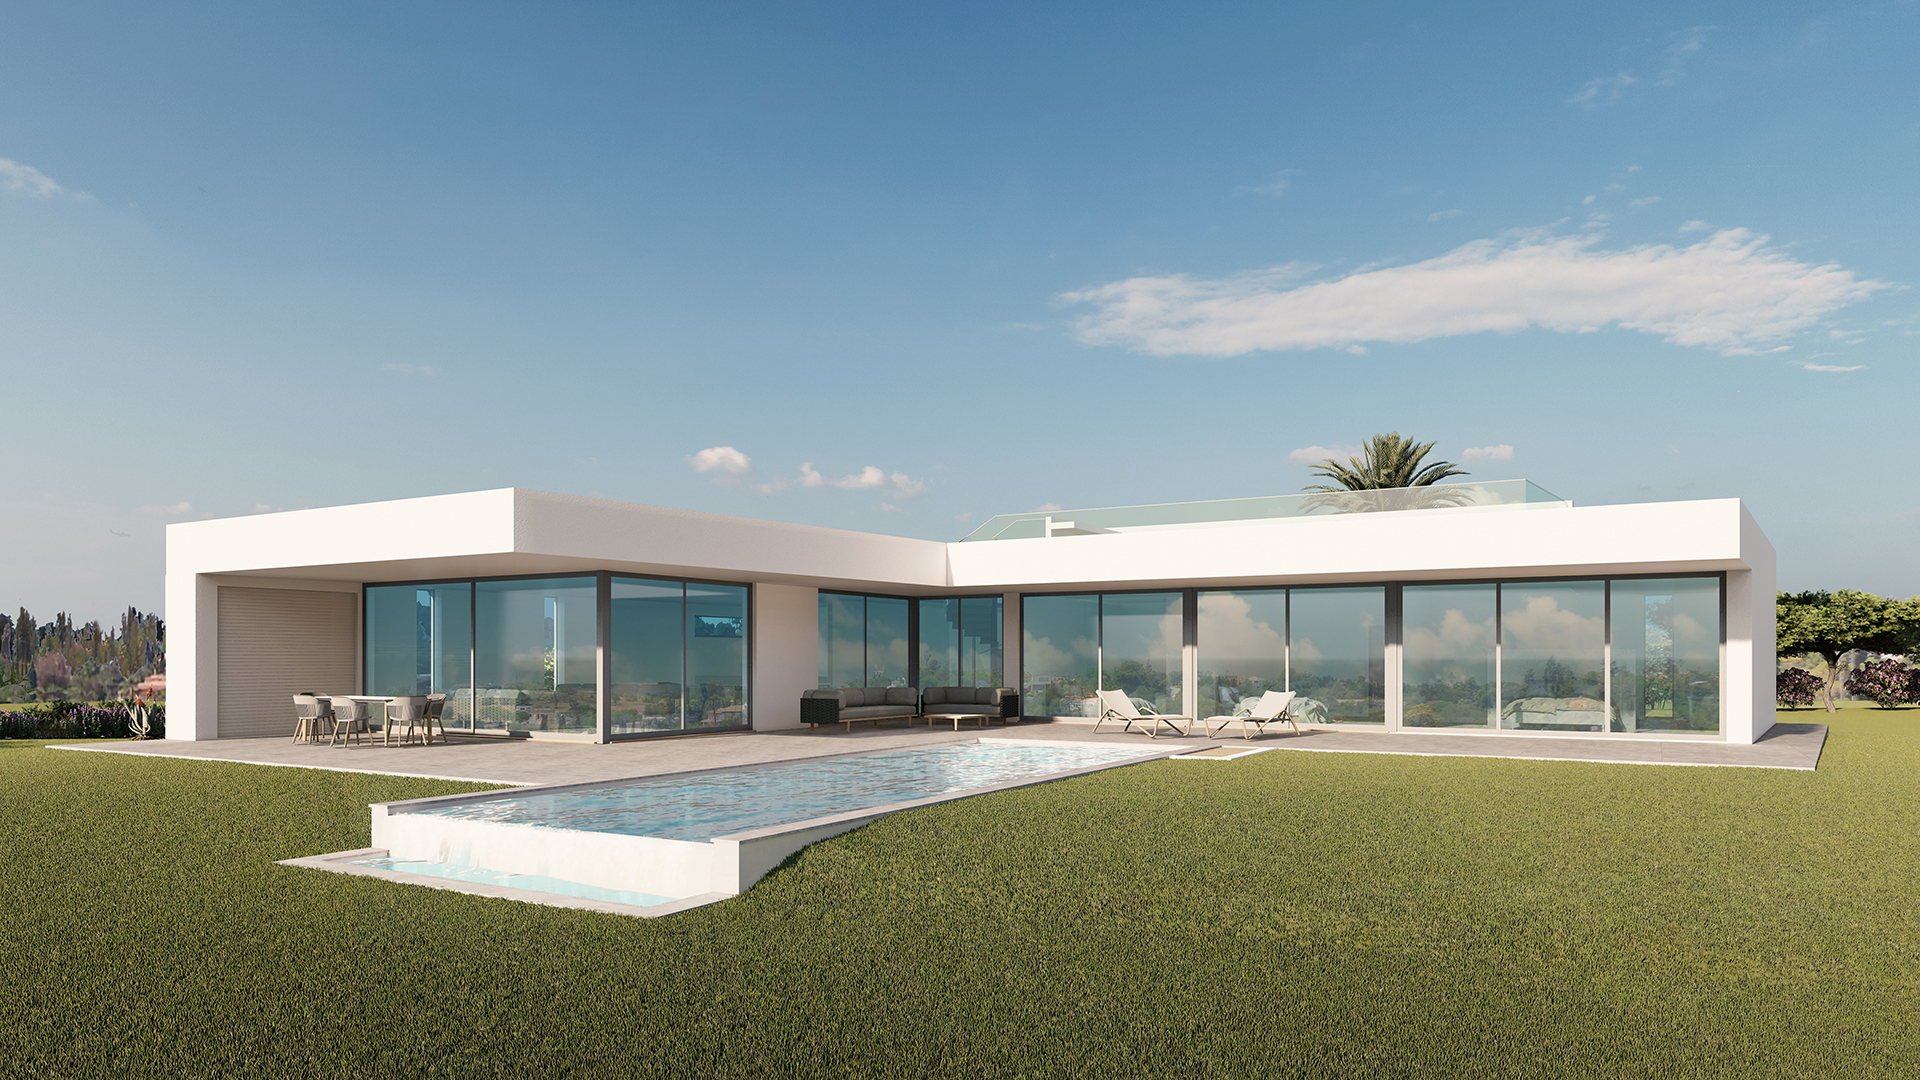 CONSTRUCTION STARTING SOON - Modern 3 bedroom villa with pool and sea views, near Lagos | LG990 The project is in the approval phase, construction will start accordingly. A modern 3 bedroom villa with large pool and garage on a plot of 3162 m². 